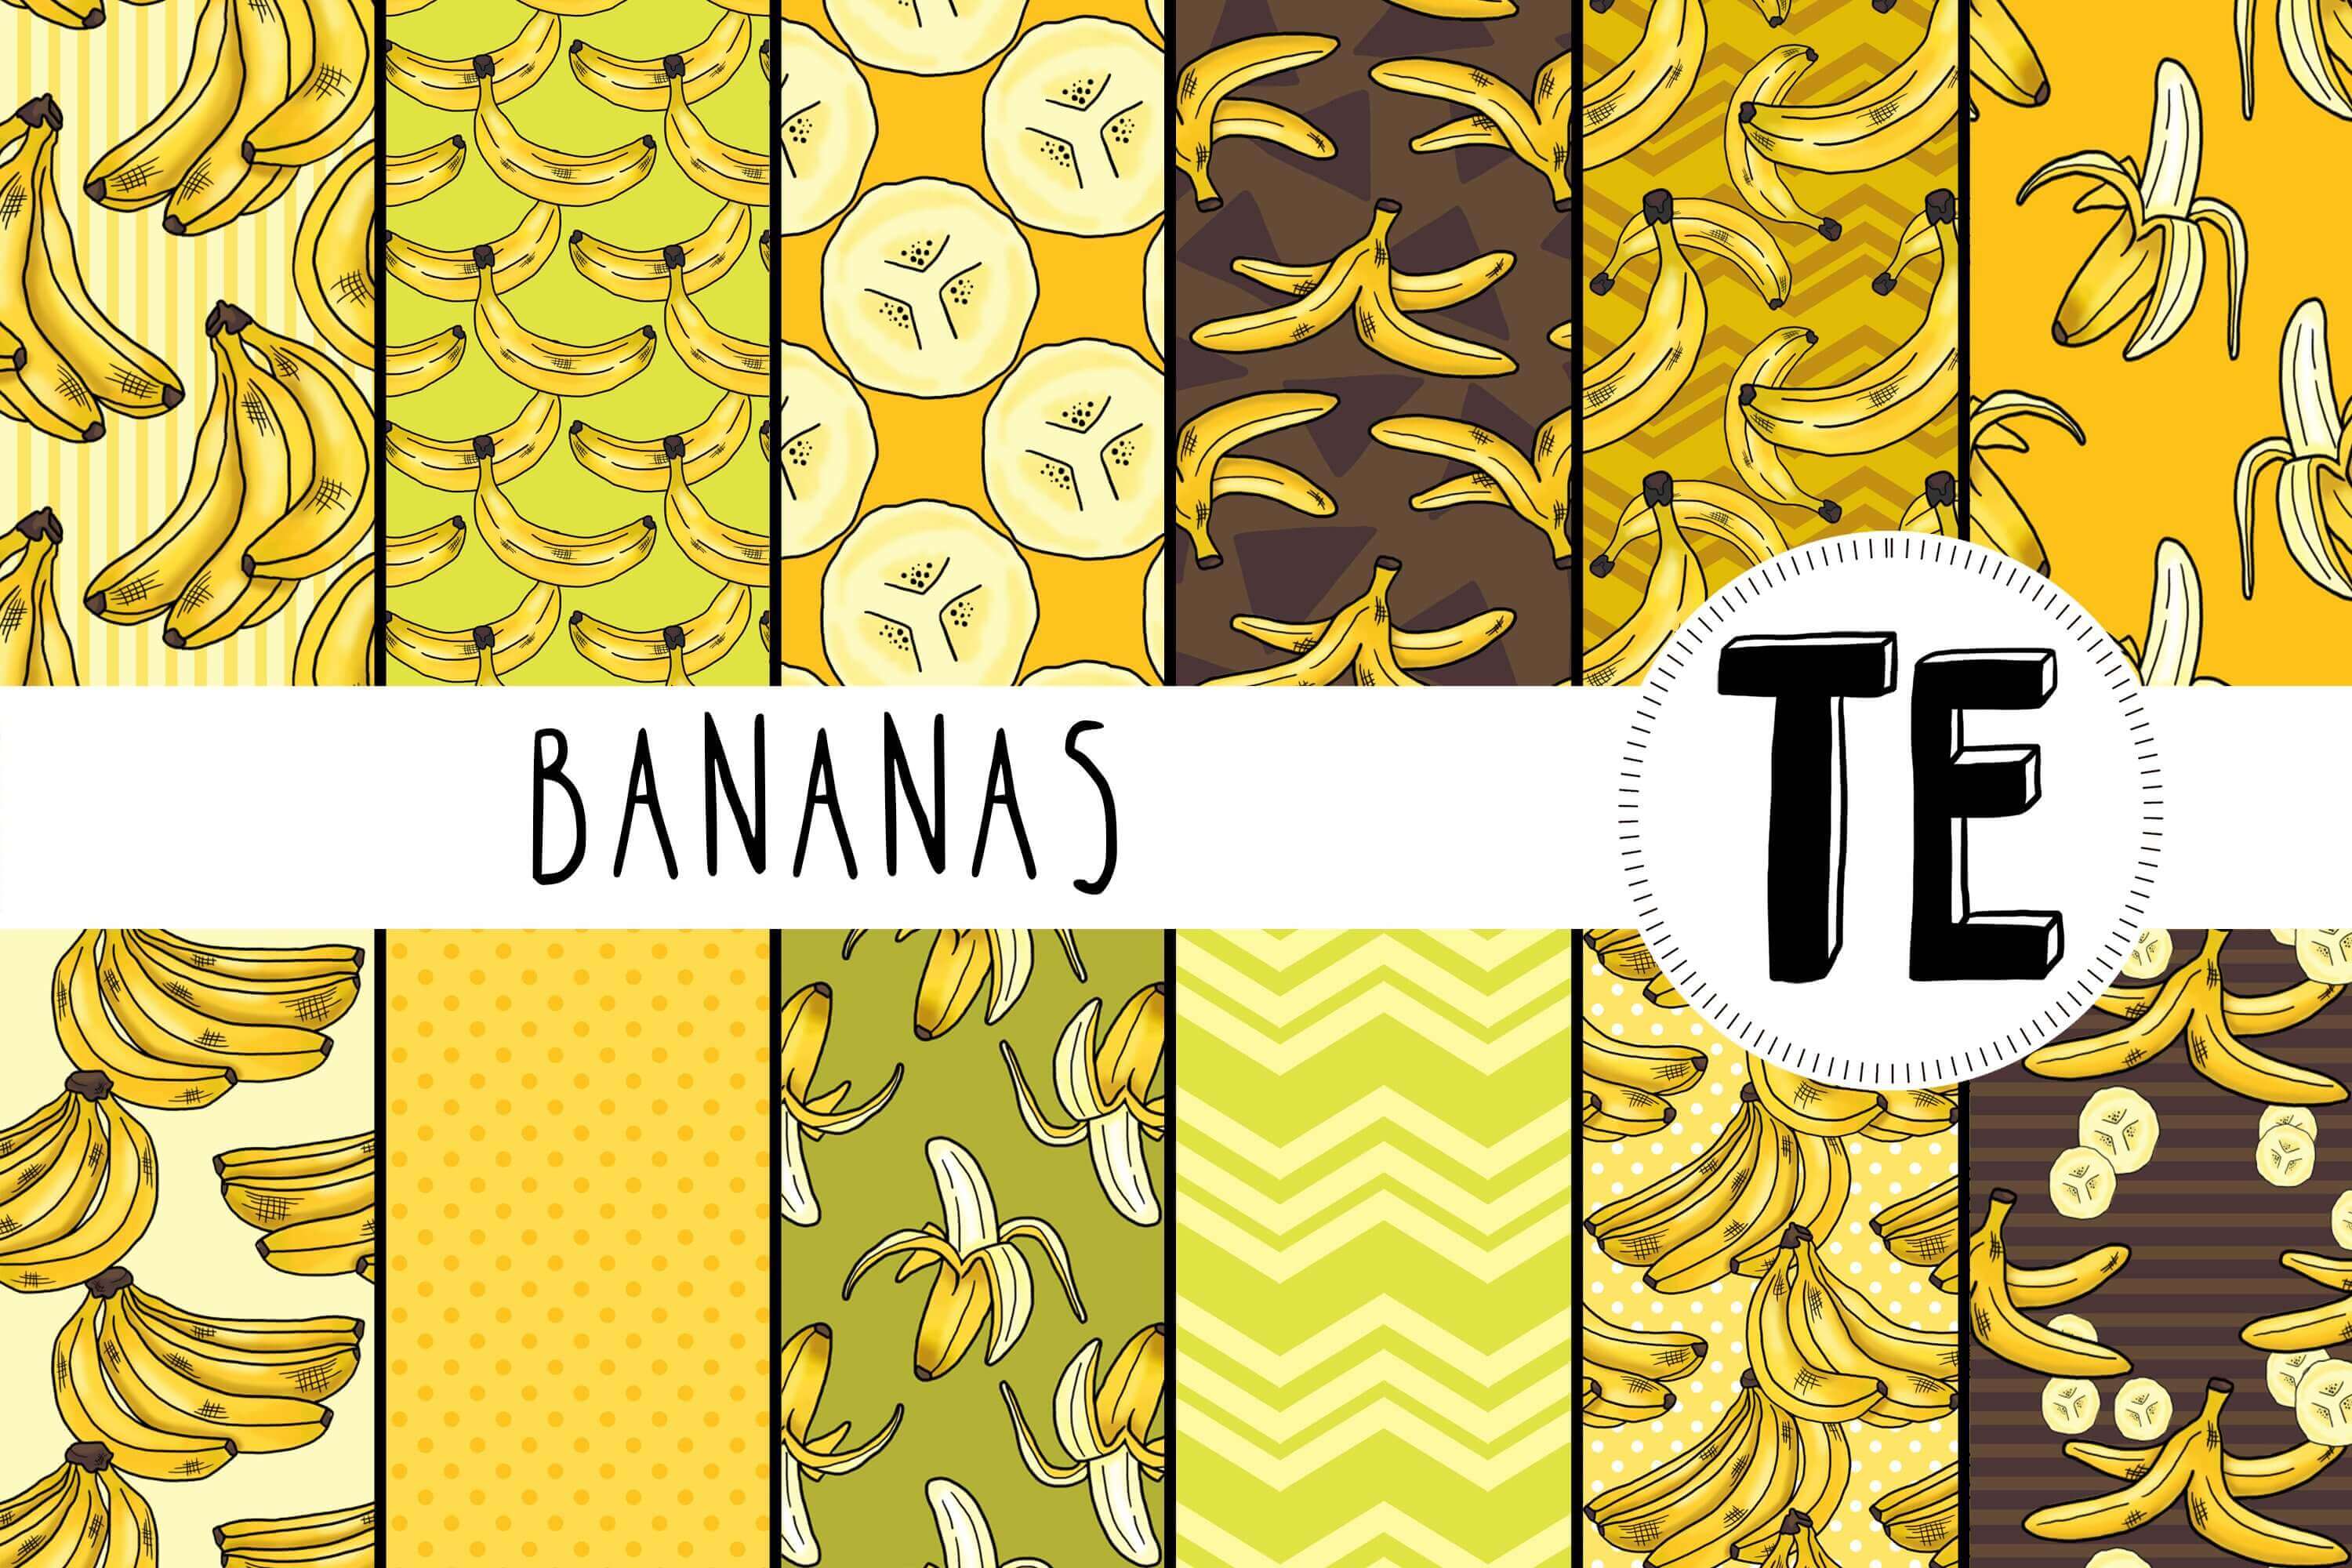 Image of bananas on yellow and gray backgrounds.